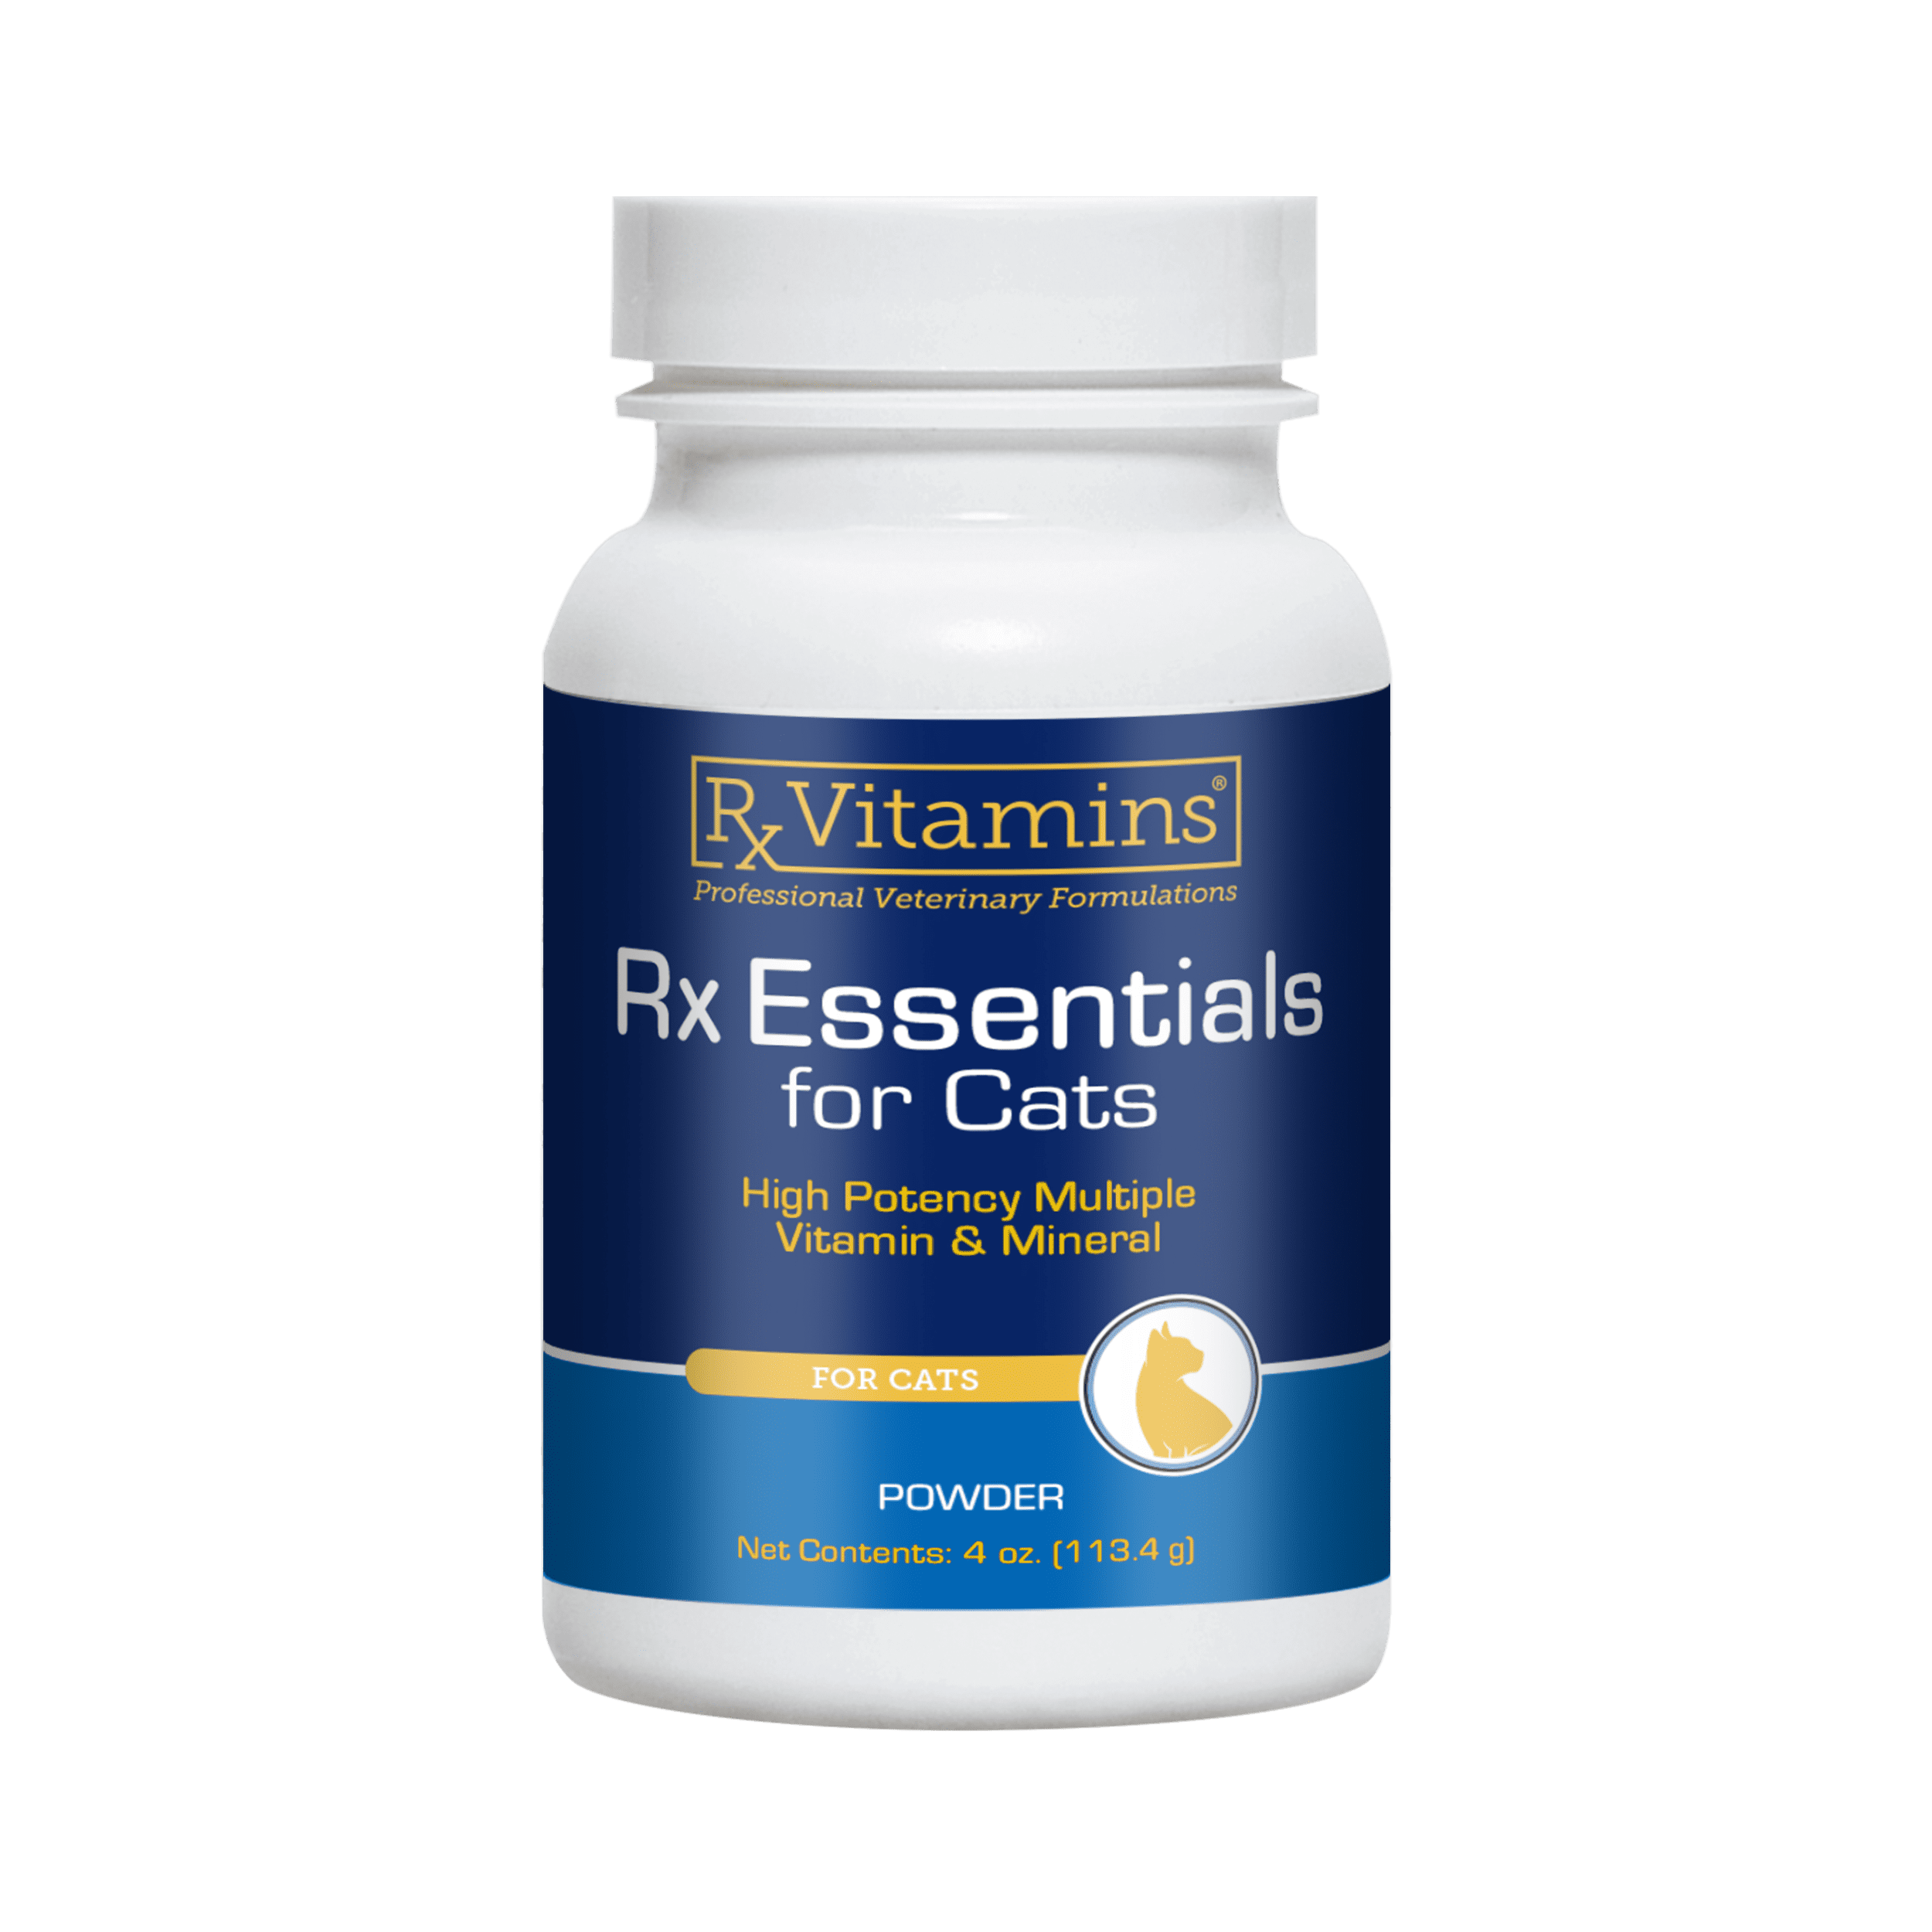 RX Essentials for Cats